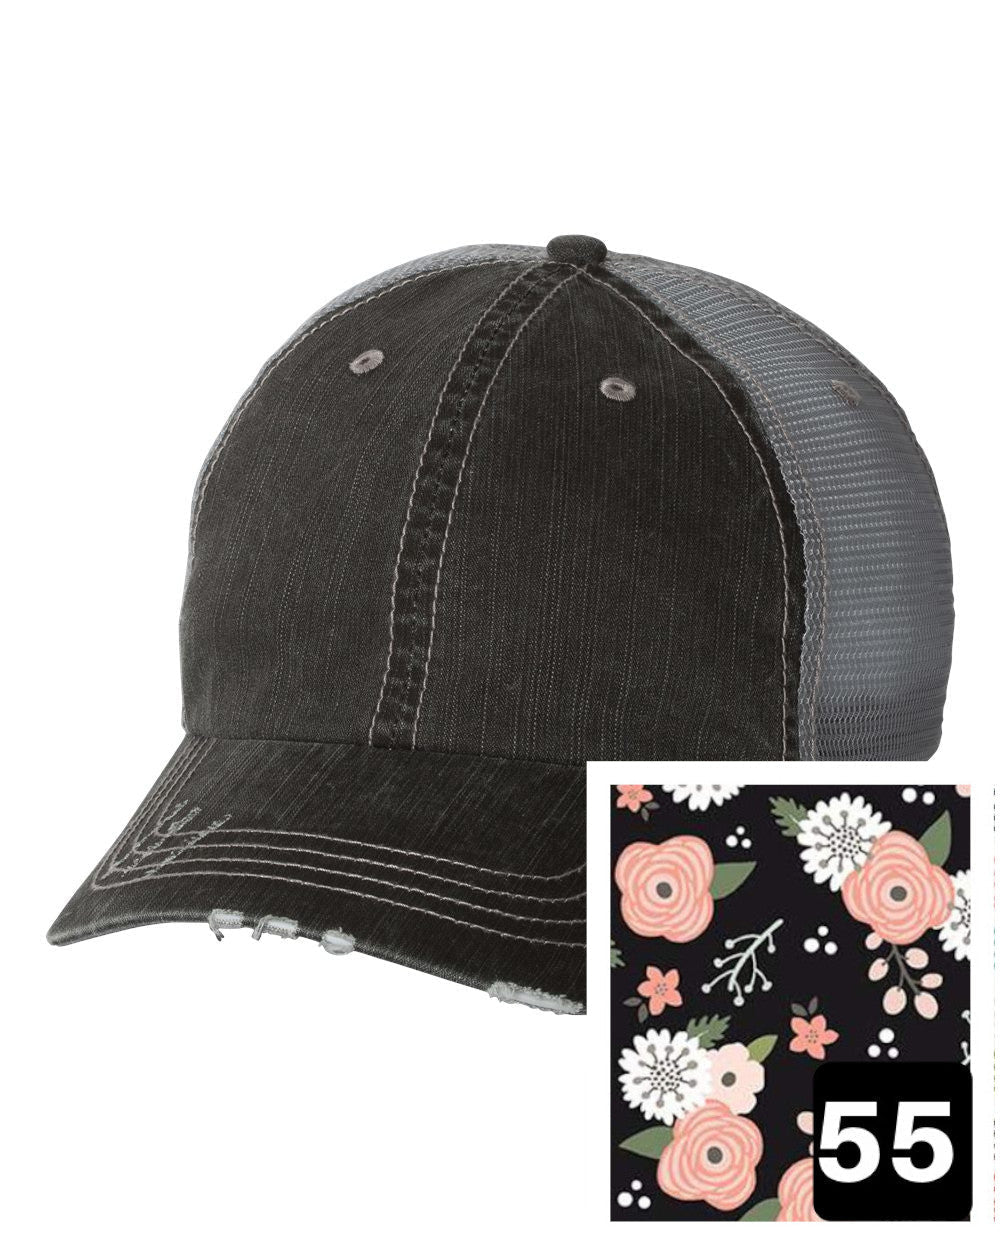 gray distressed trucker hat with petite floral on navy fabric state of Florida